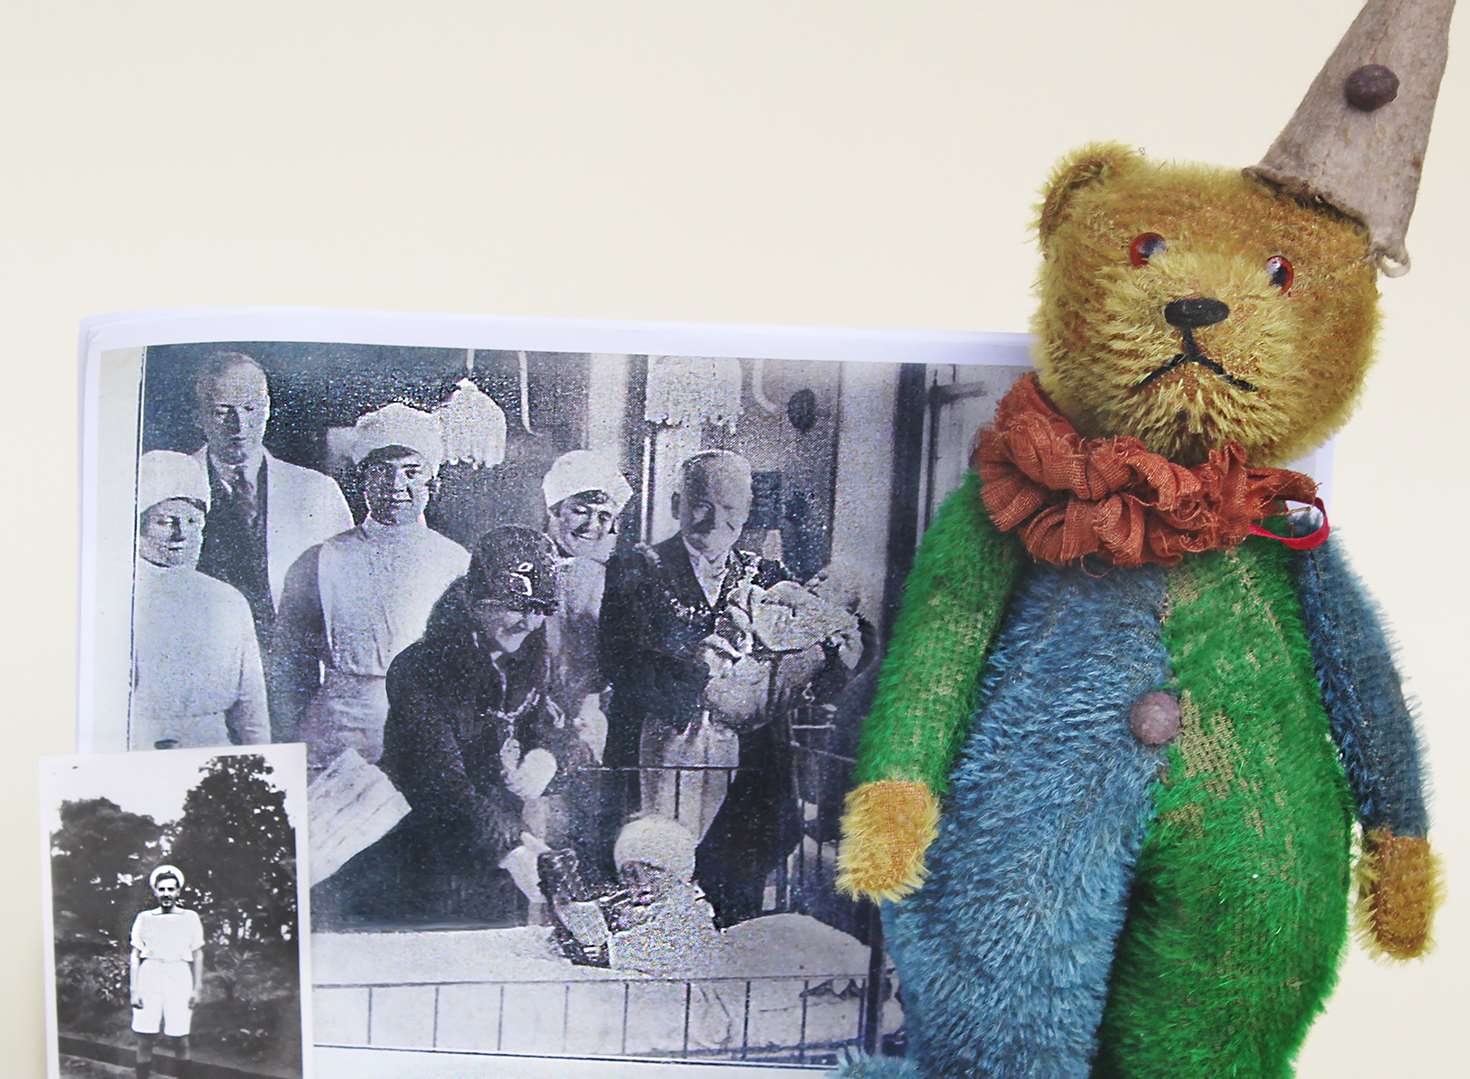 This German Clown Teddy Bear is estimated to fetch nearly £1,000 at auction